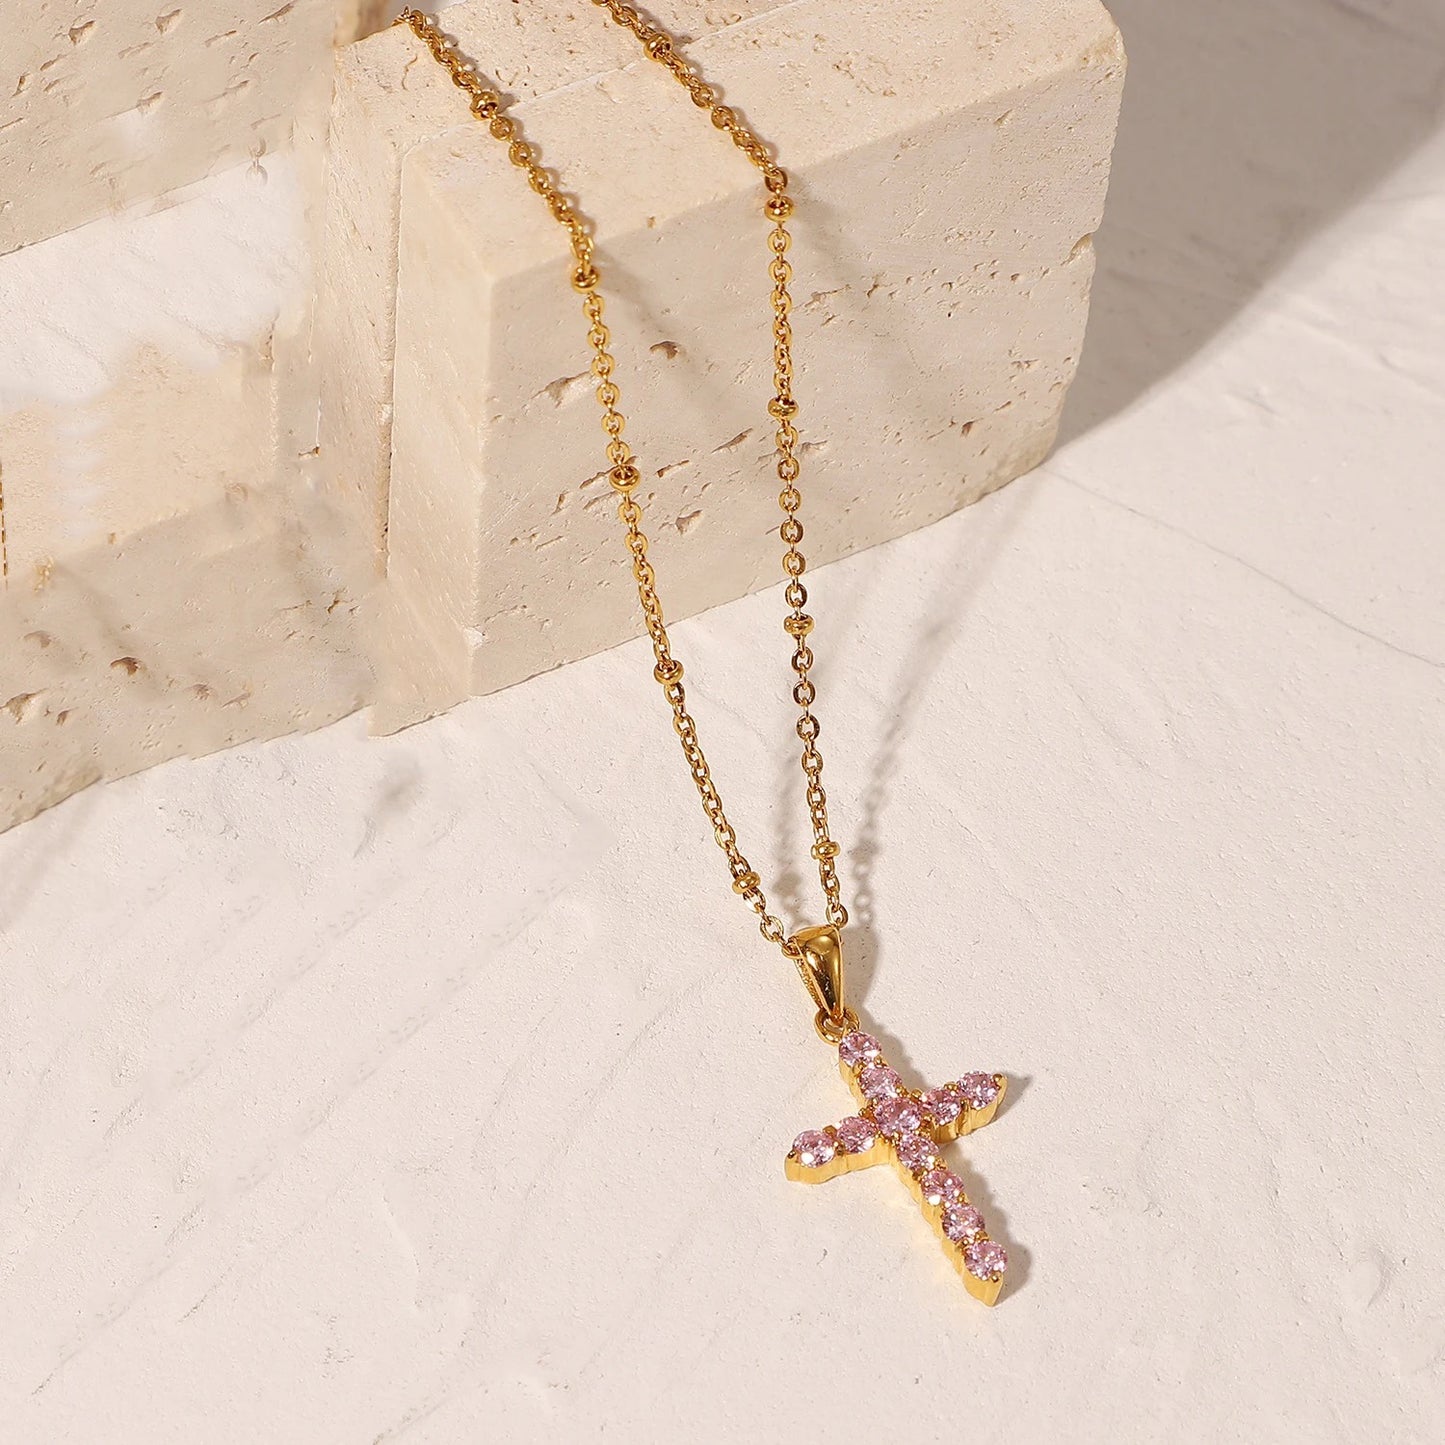 Golden Rose Cross Stainless Steel Chain Necklace from Glazd Jewels